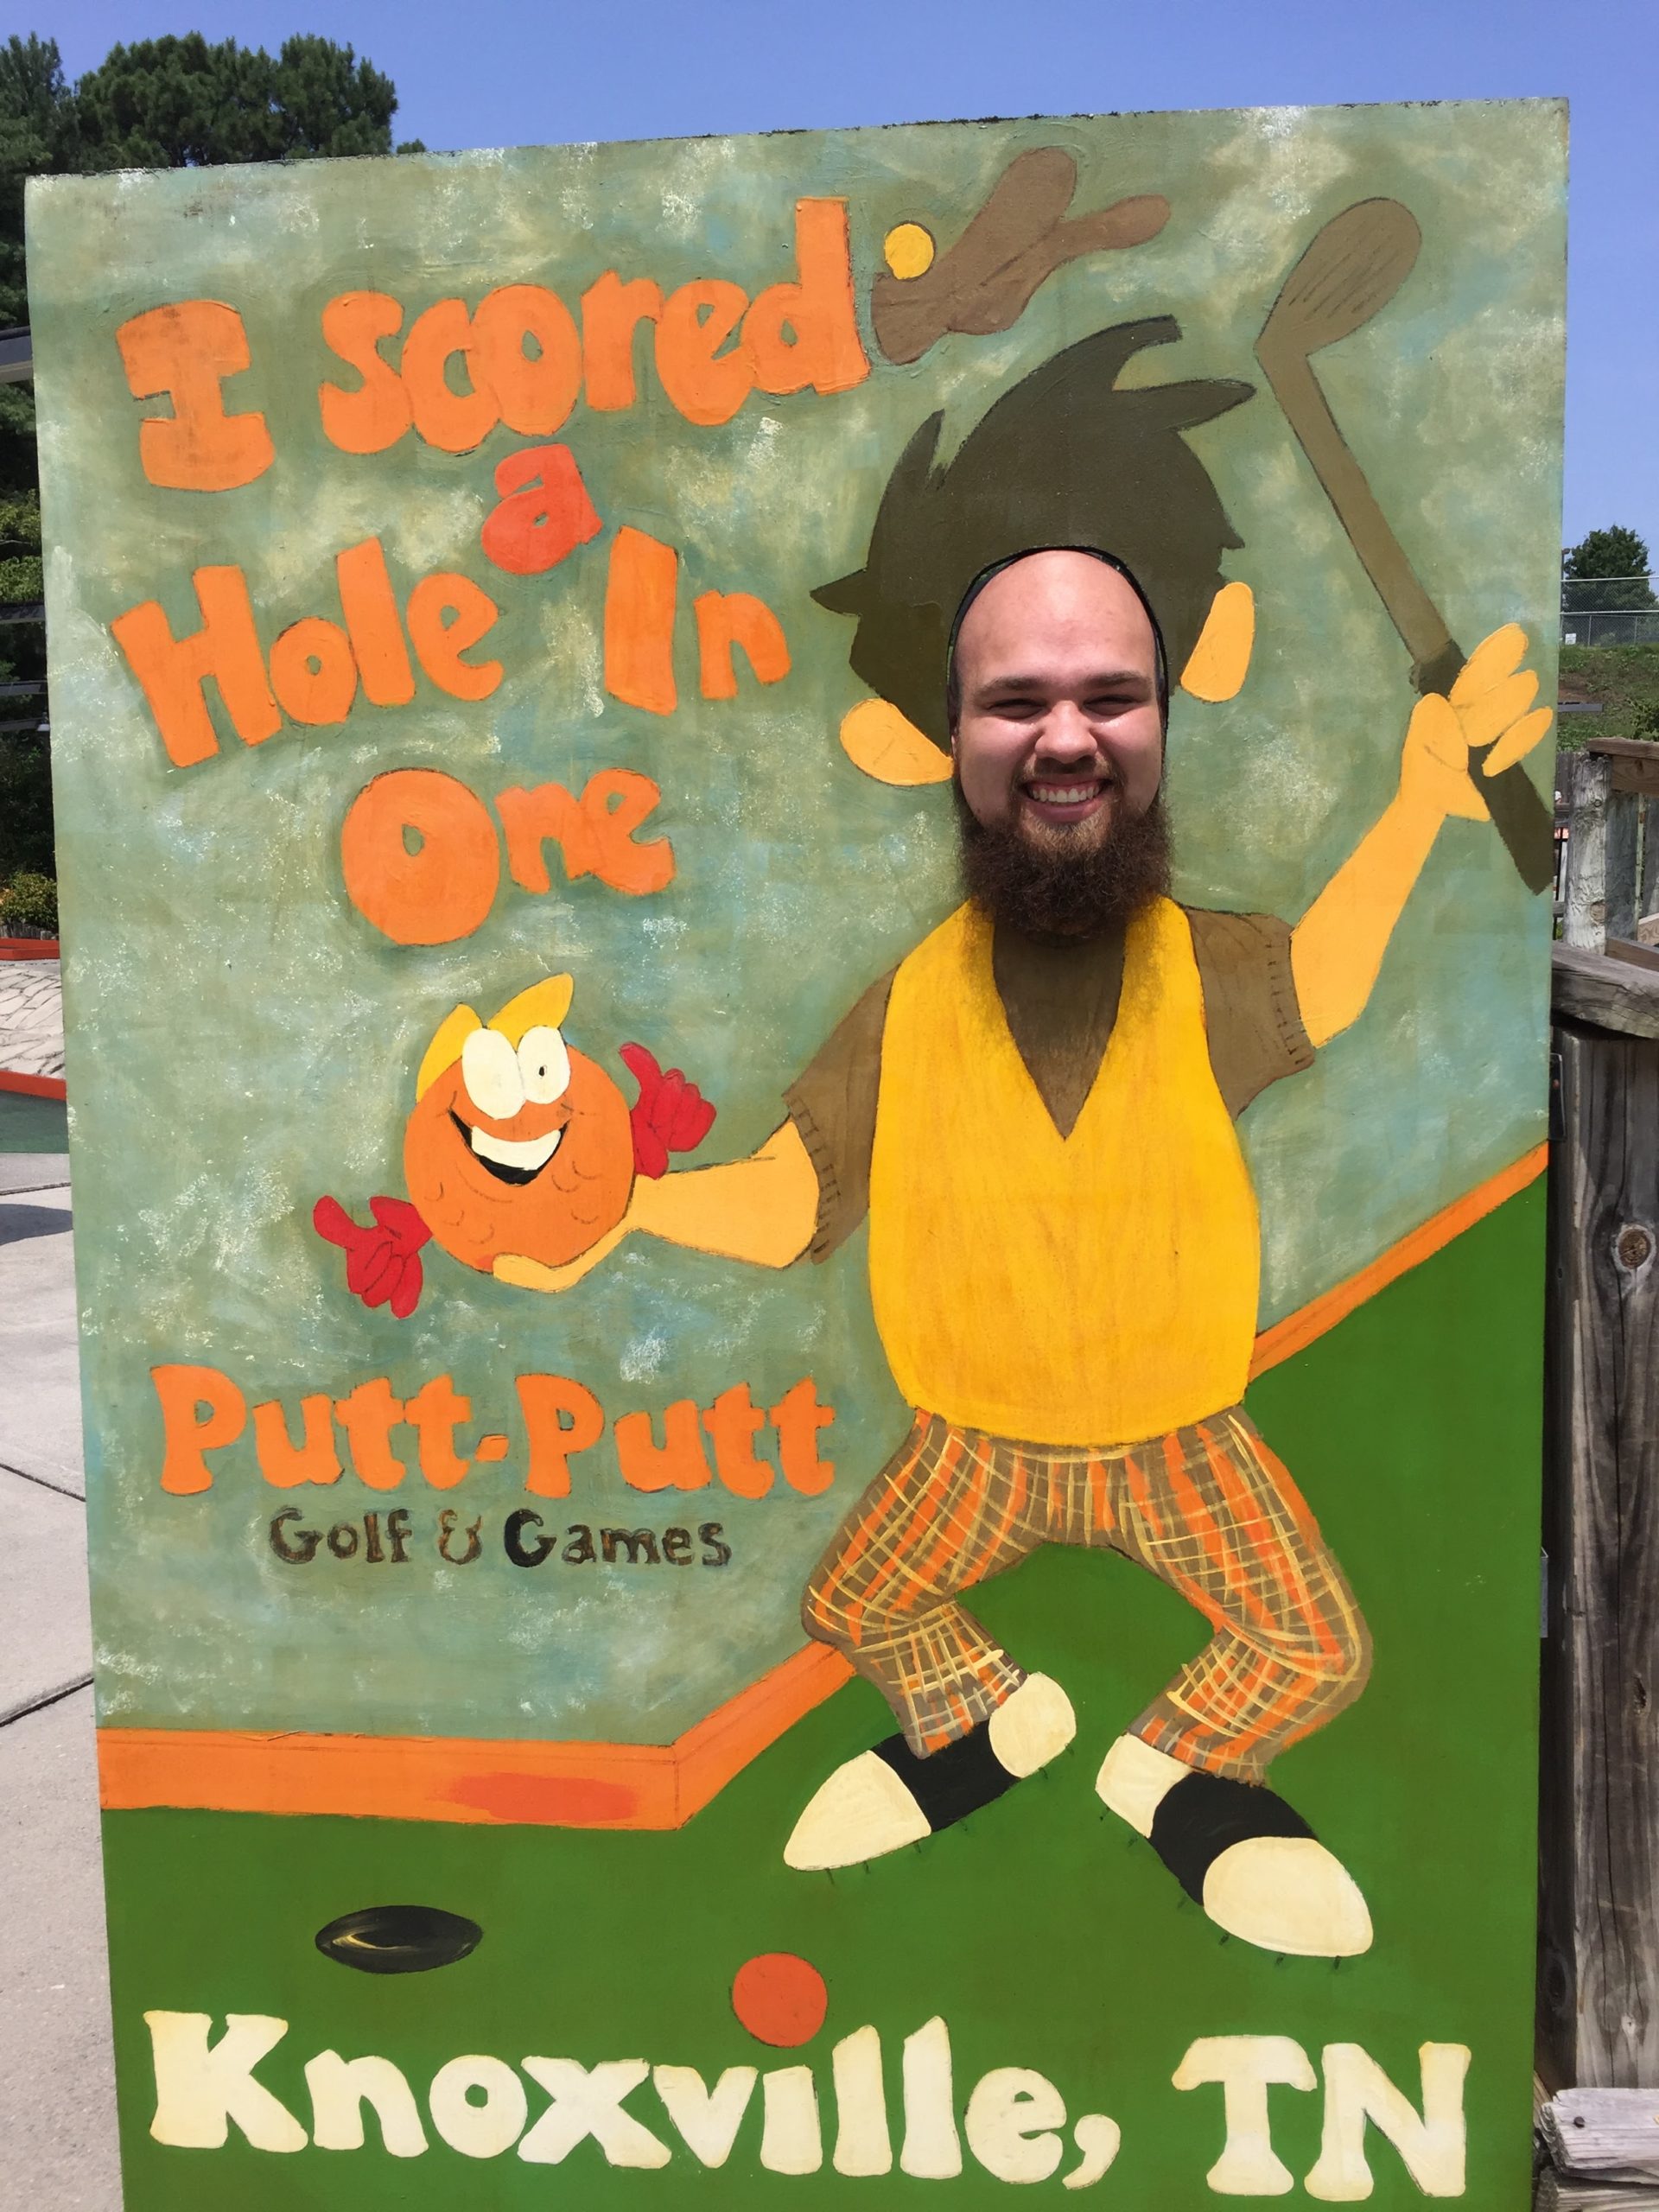 John posing after scoring a hole in one at mini-golf!